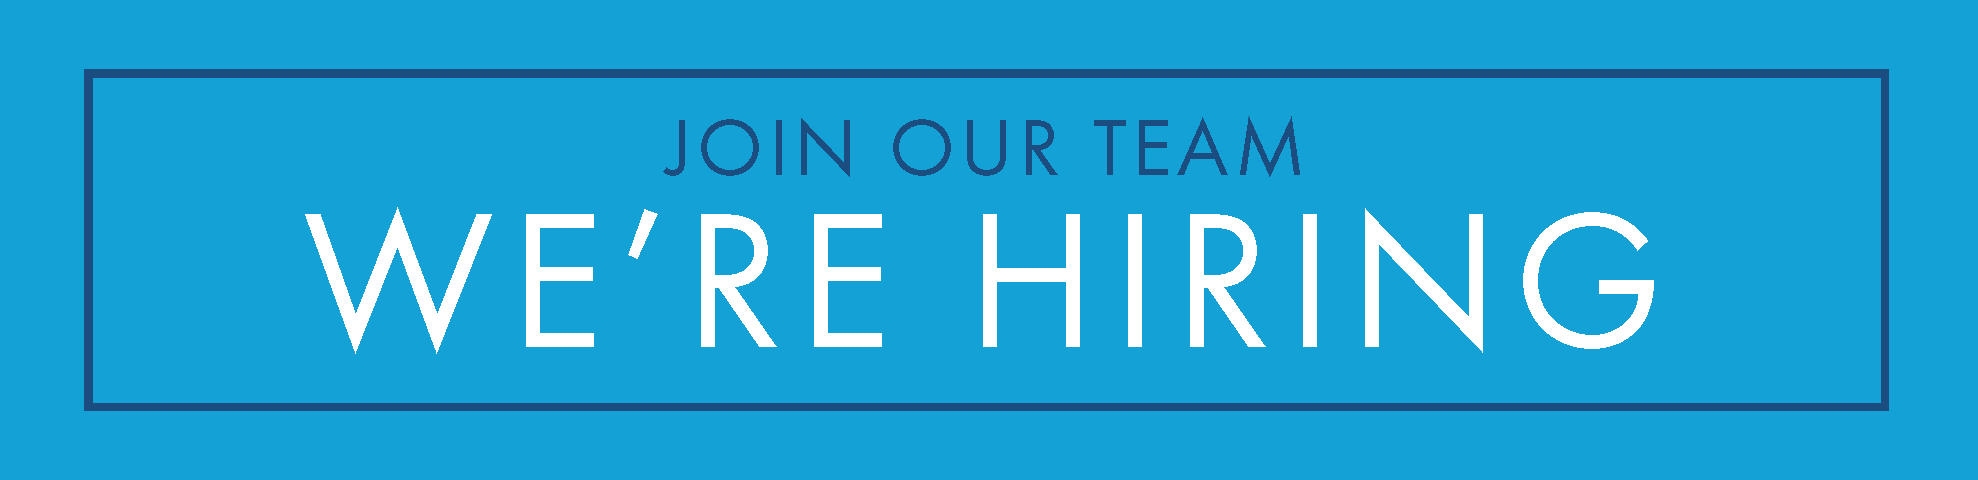 Join our Team - Now Hiring Home Health Care Jobs - CNA